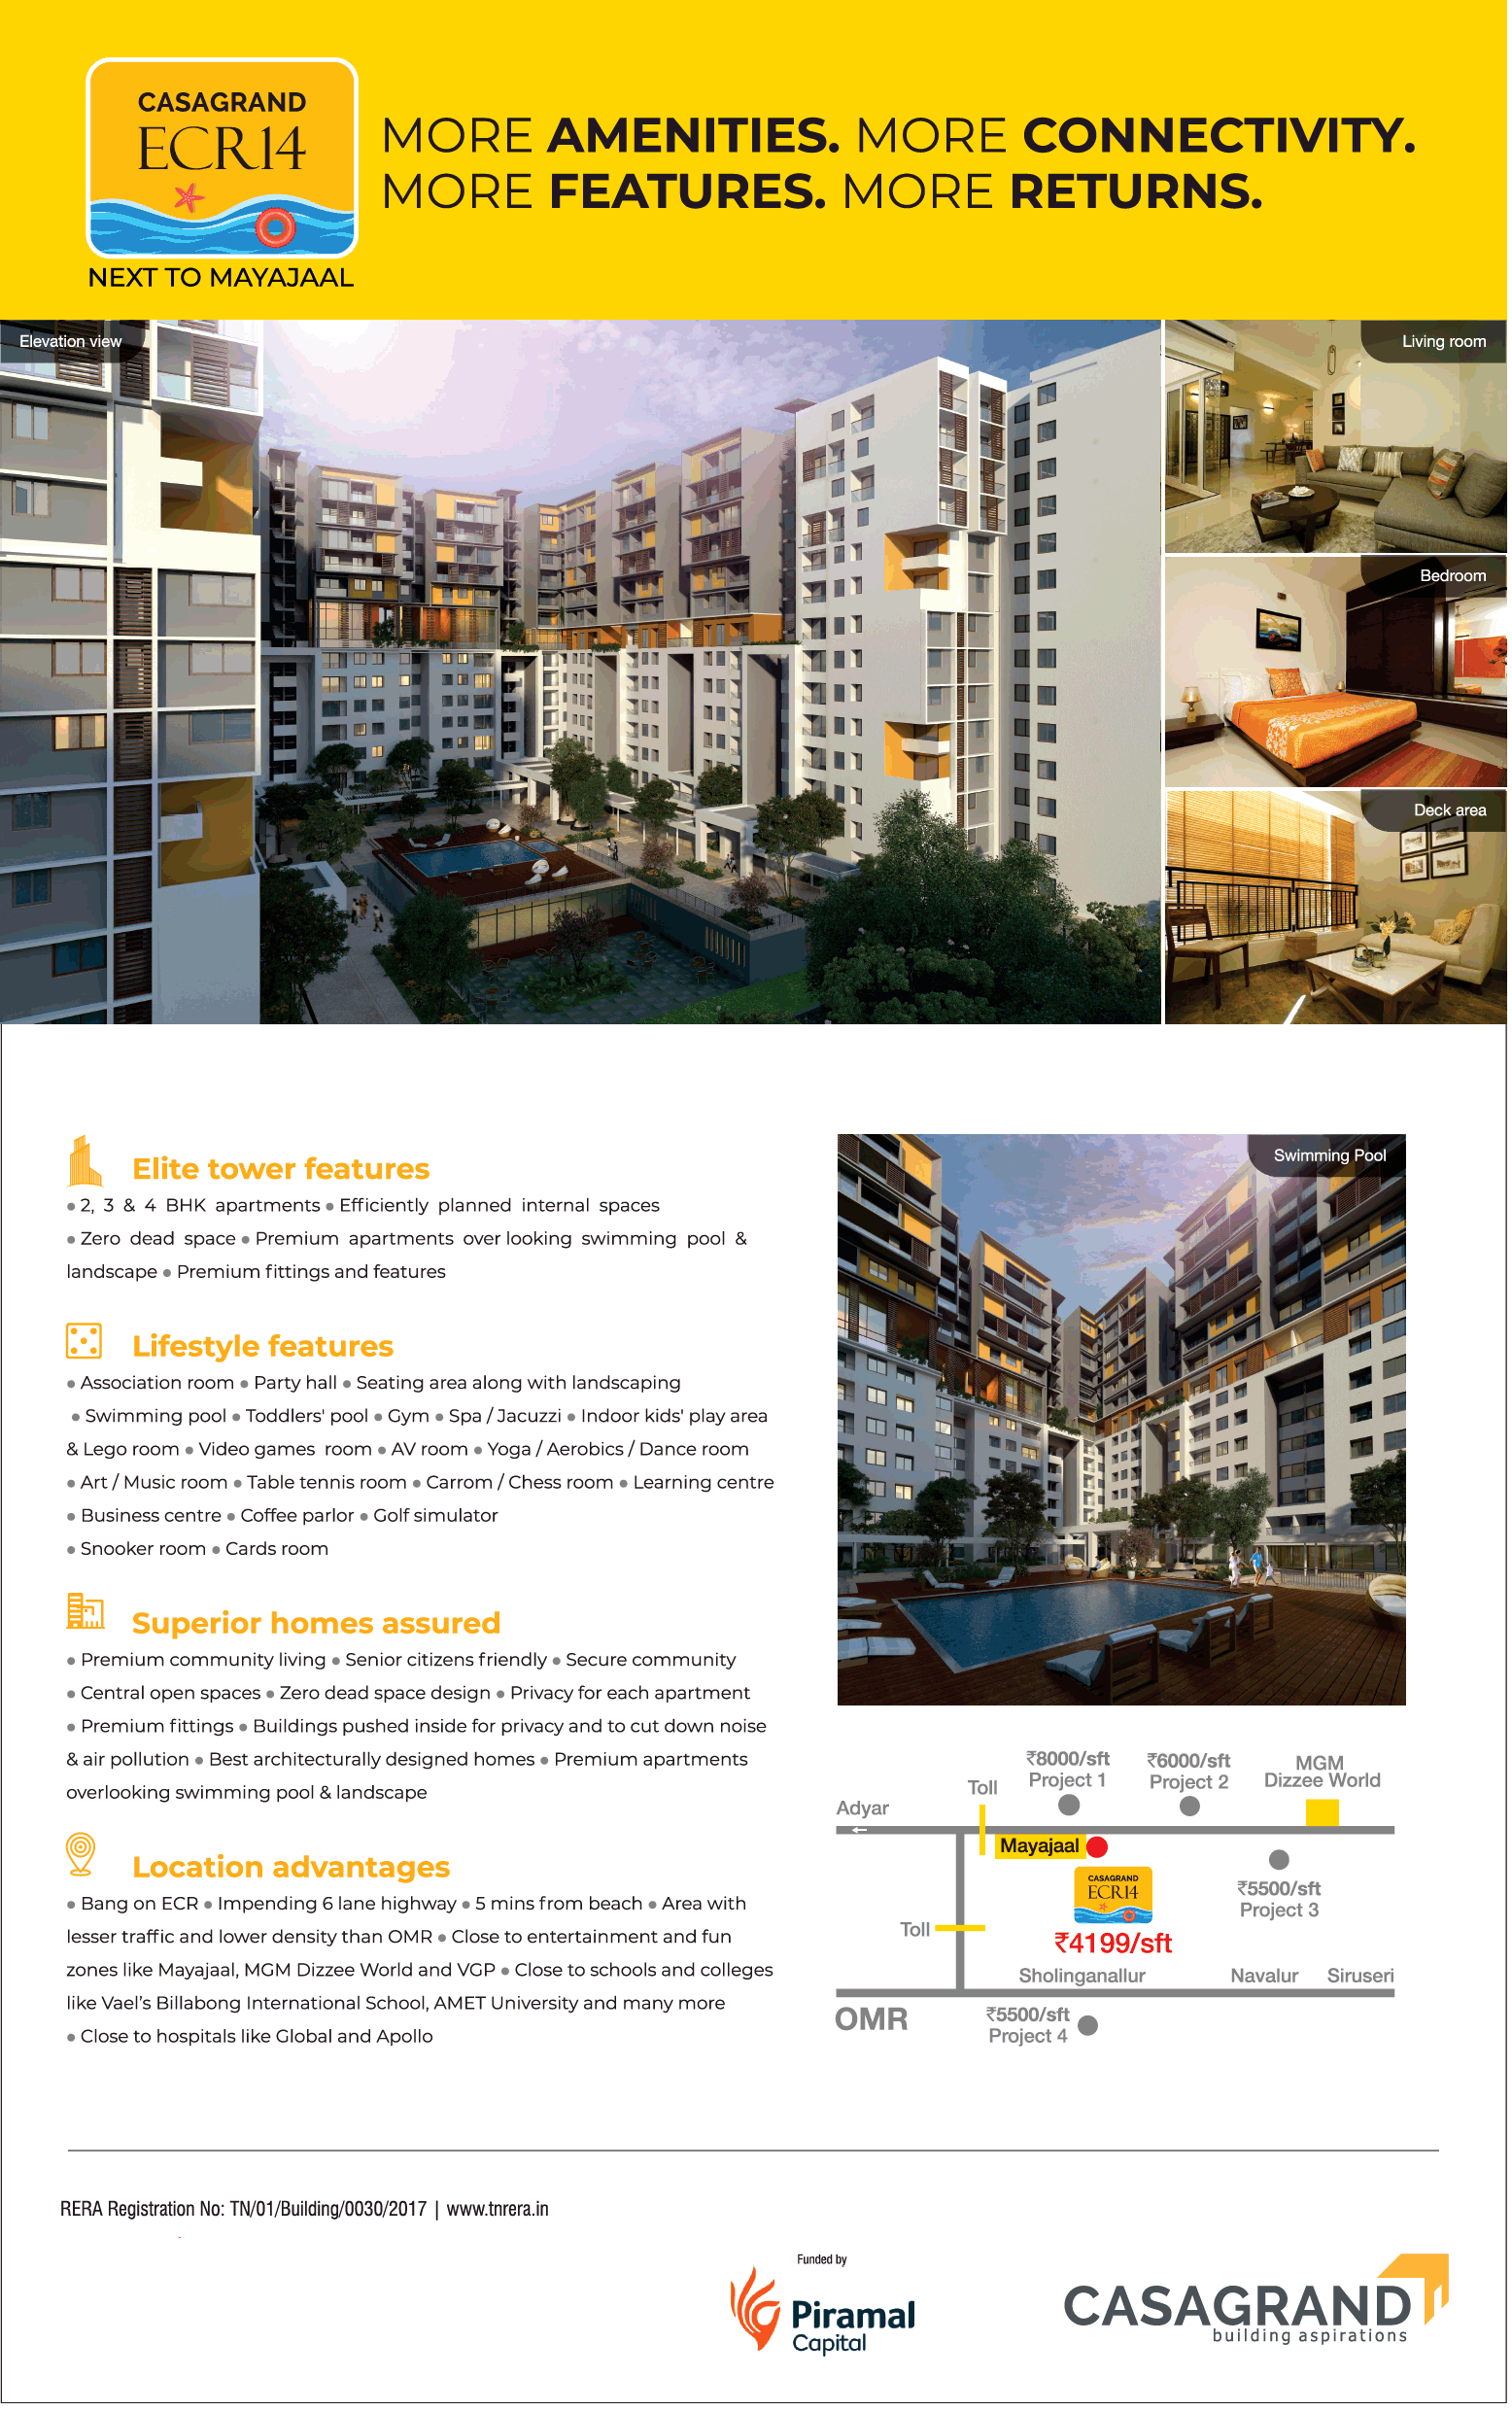 Avail More Amenities, Connectivity, Features, Returns at Casagrand ECR14 in Chennai